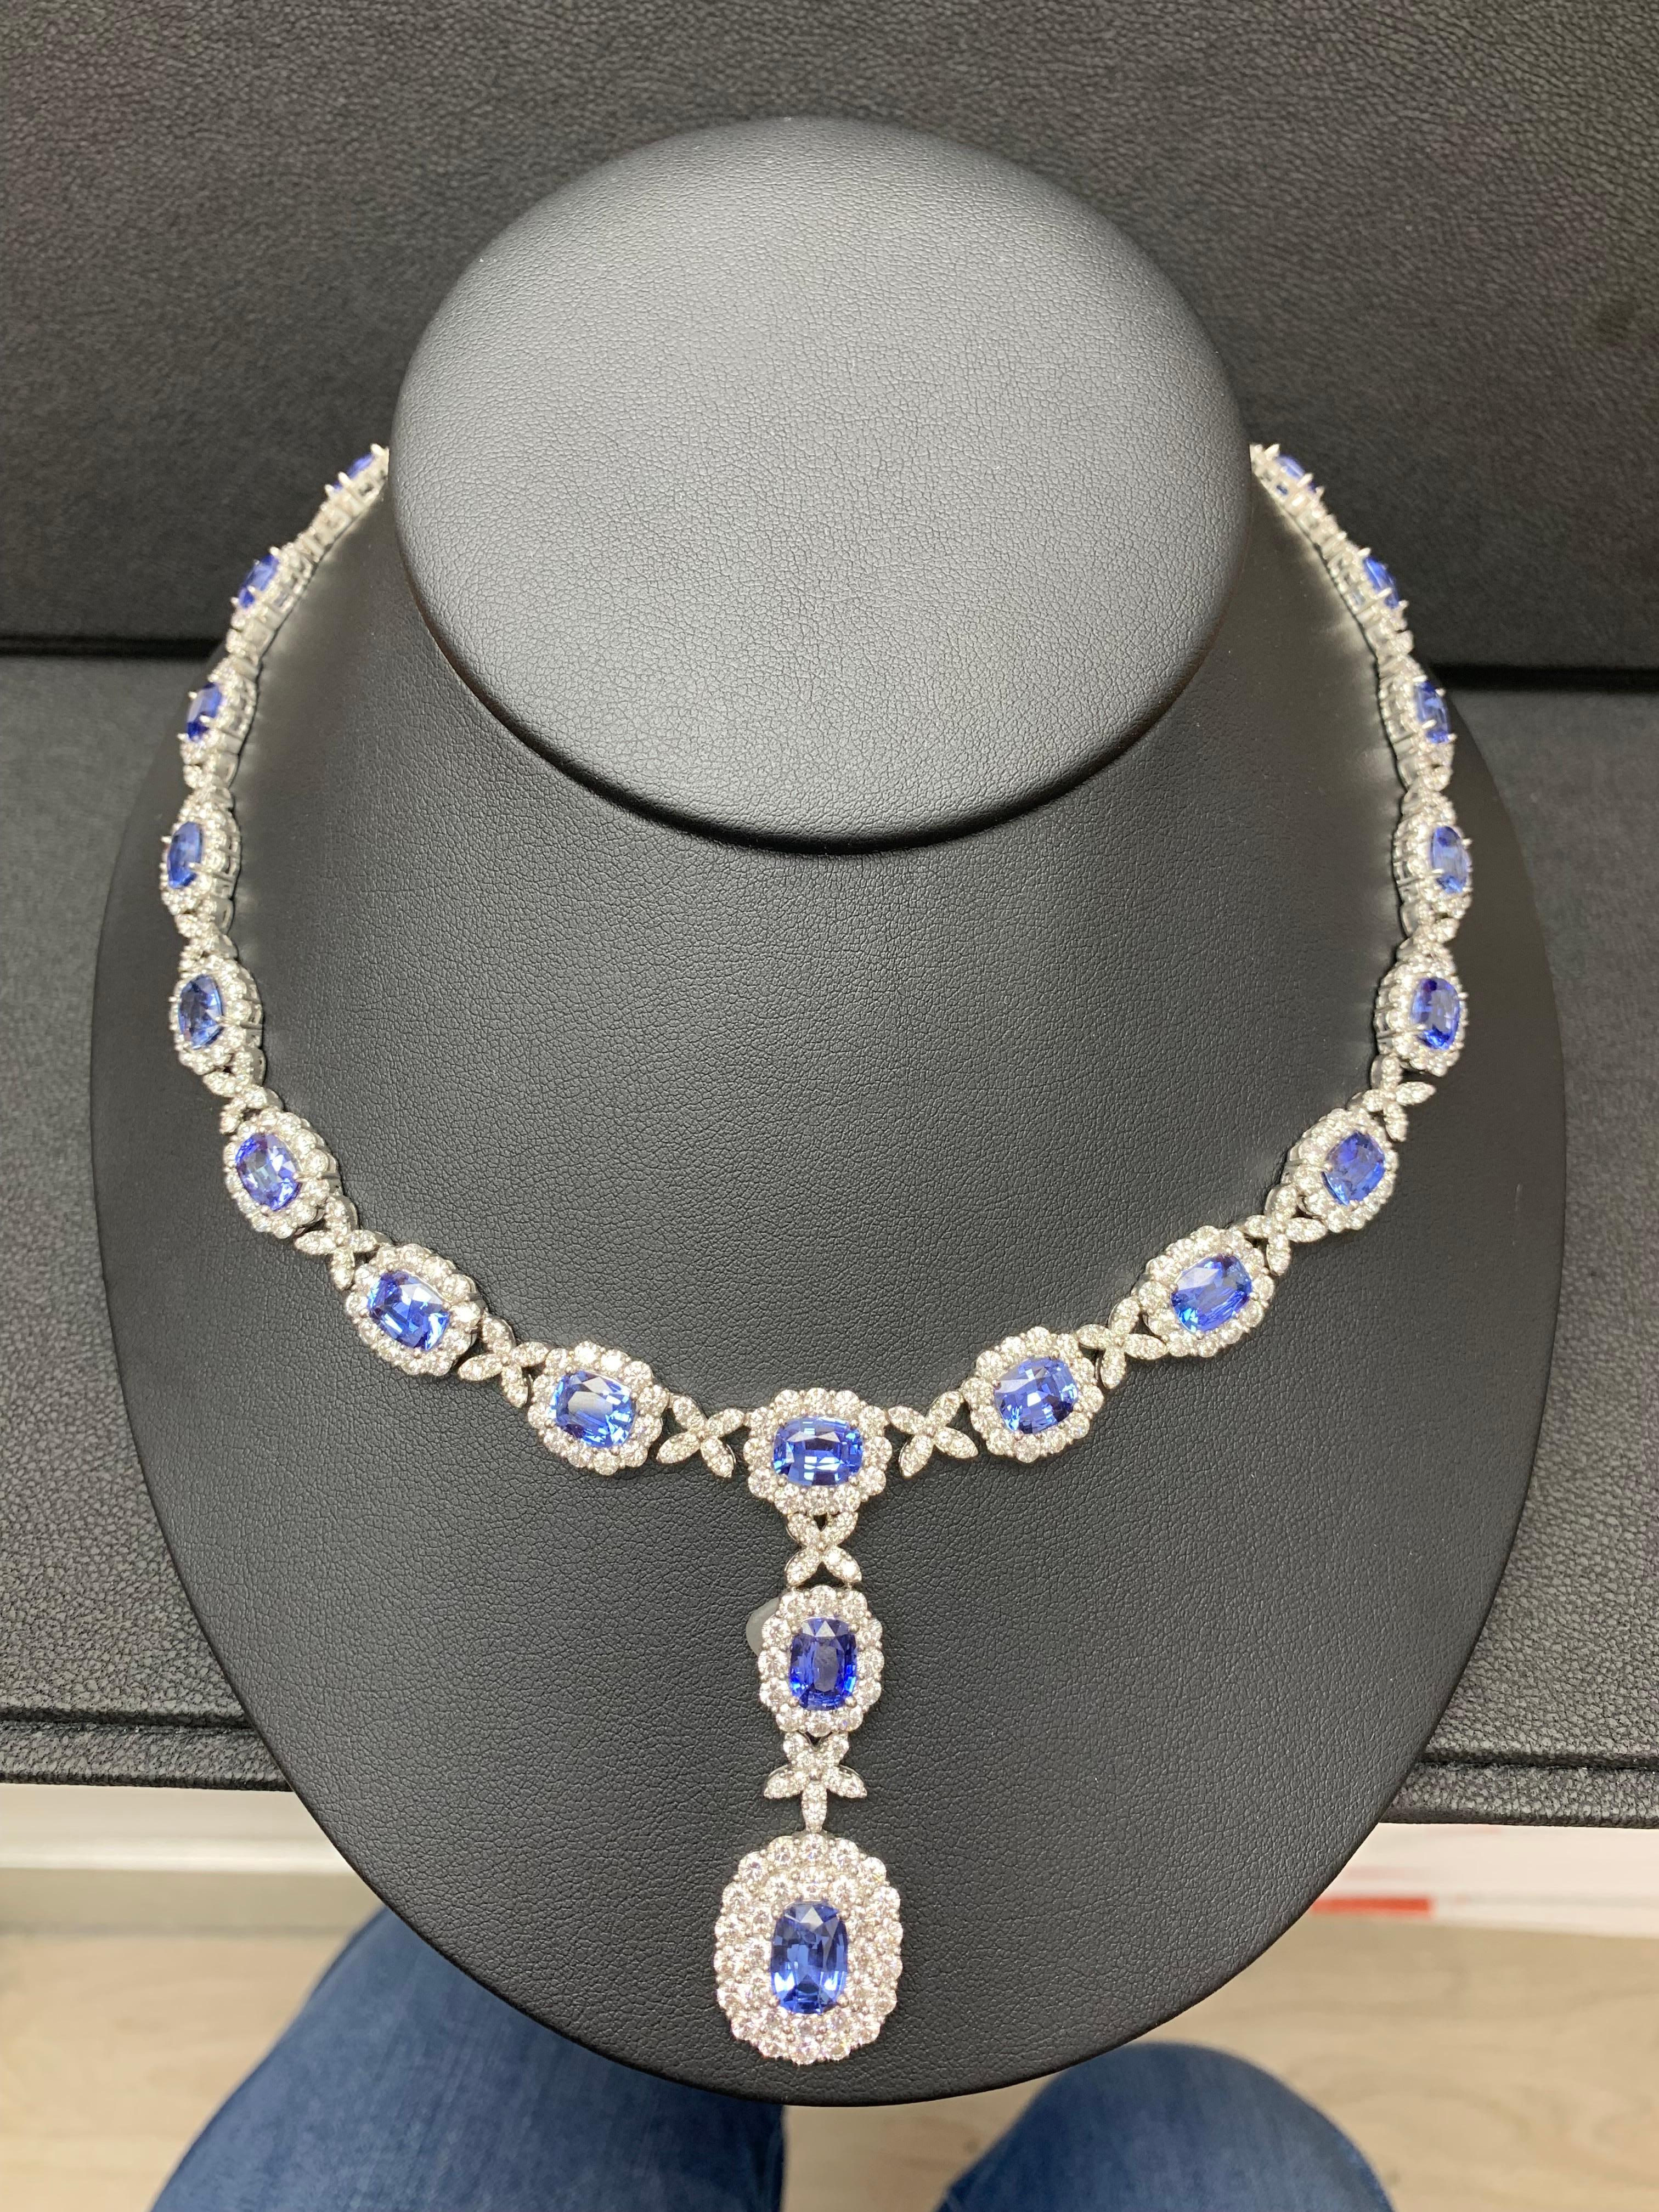 32.91 Carat Oval Cut Sapphire and Diamond Drop Necklace in 18K White Gold For Sale 12